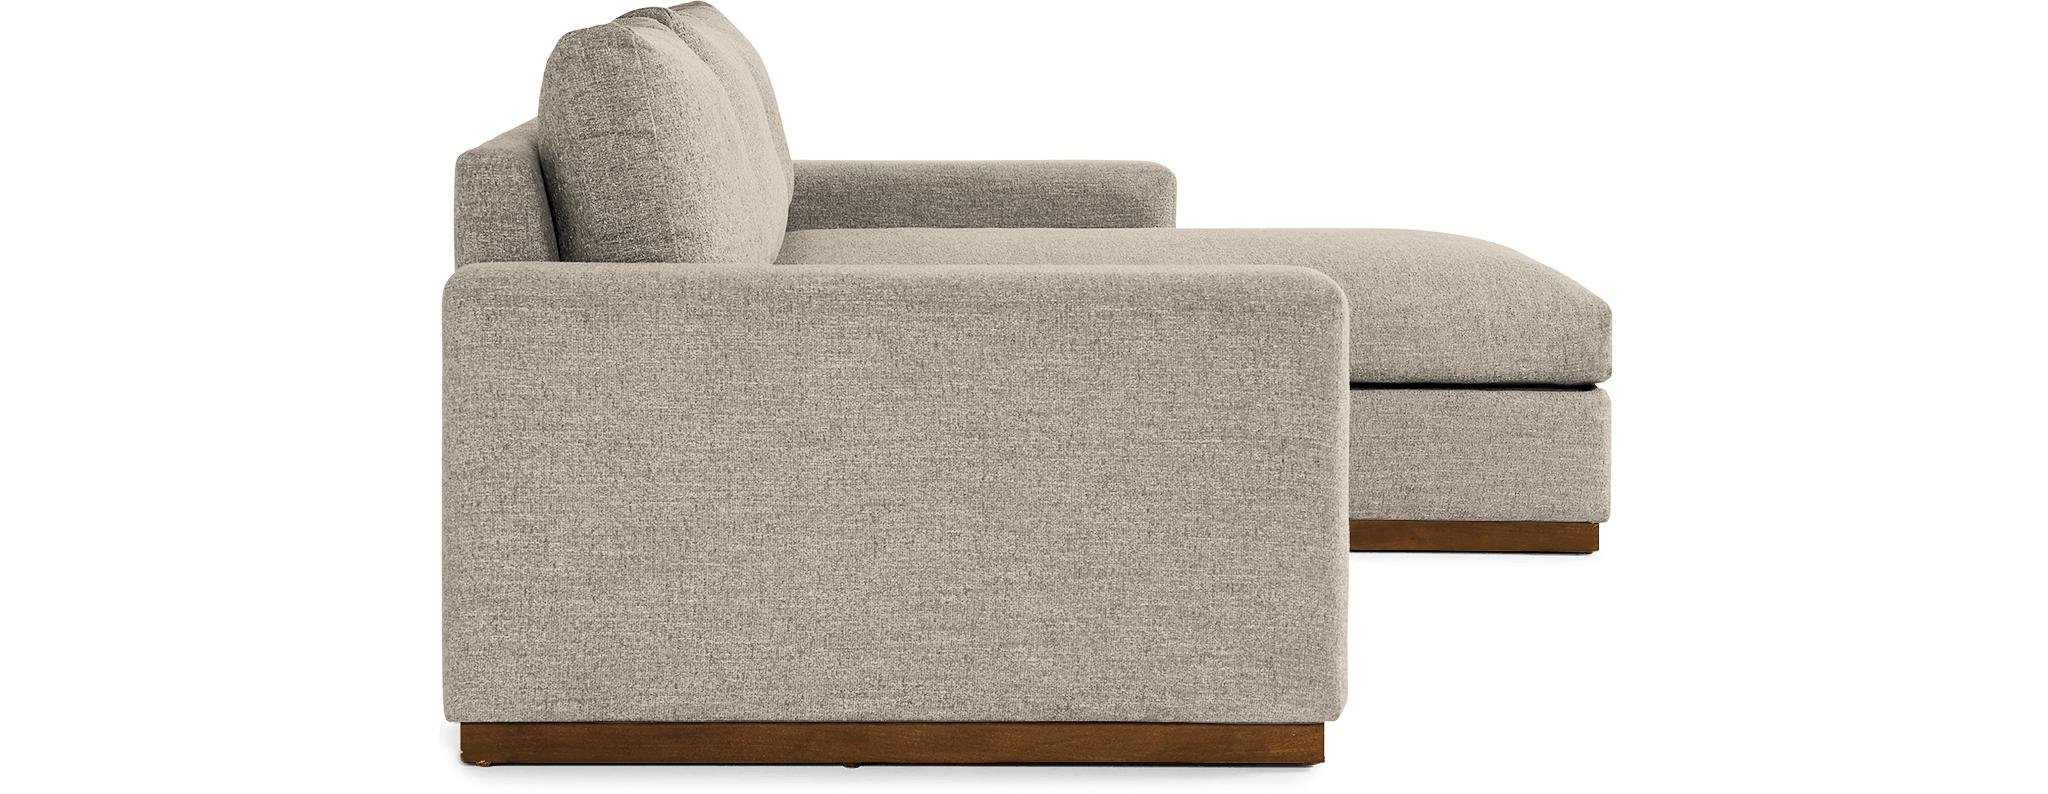 Beige/White Holt Mid Century Modern Sectional with Storage - Cody Sandstone - Mocha - Right - Image 2